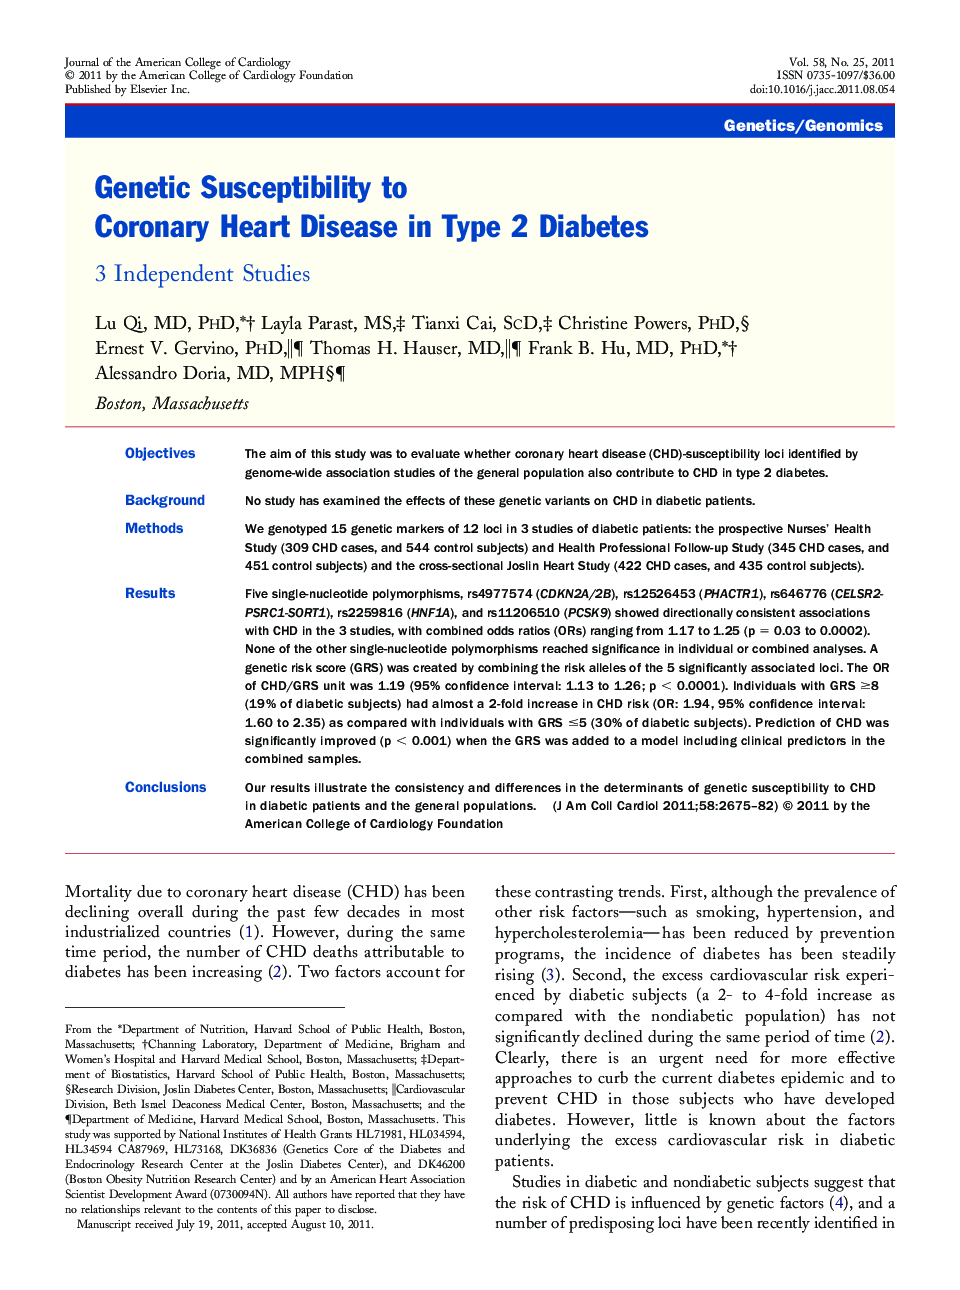 Genetic Susceptibility to Coronary Heart Disease in Type 2 Diabetes : 3 Independent Studies